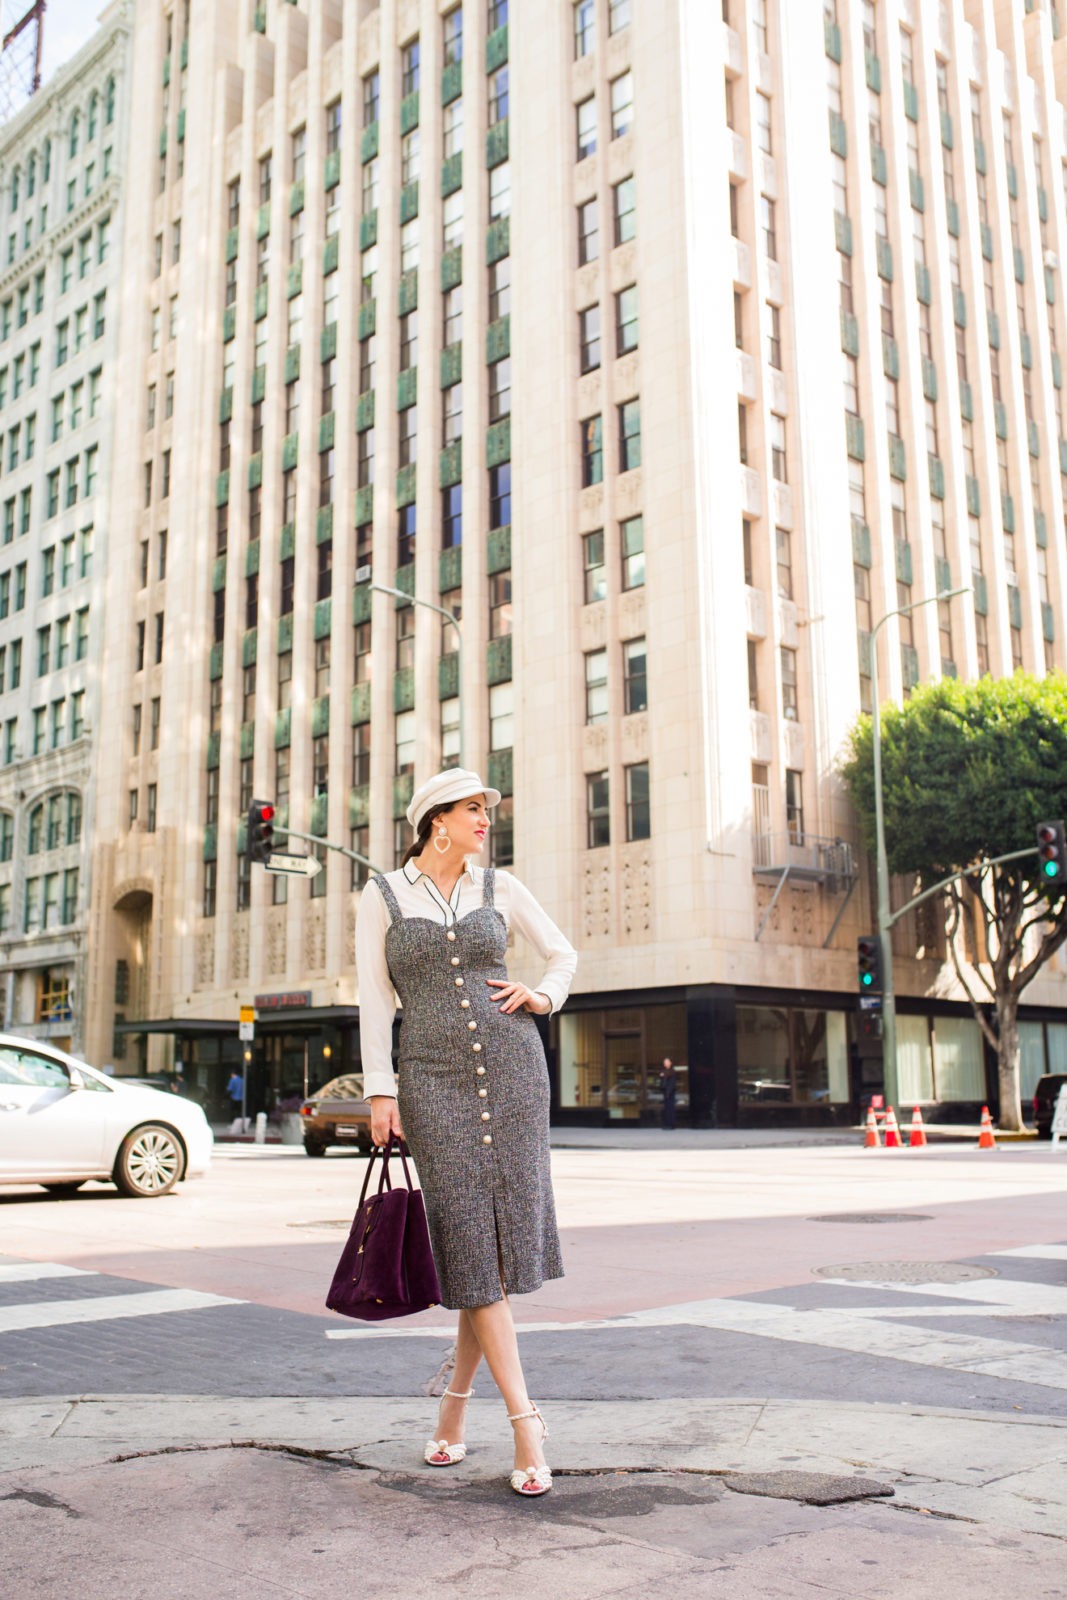 A Shopaholics Guide to Not Shopping by Los Angeles Fashion Blogger Laura Lily,